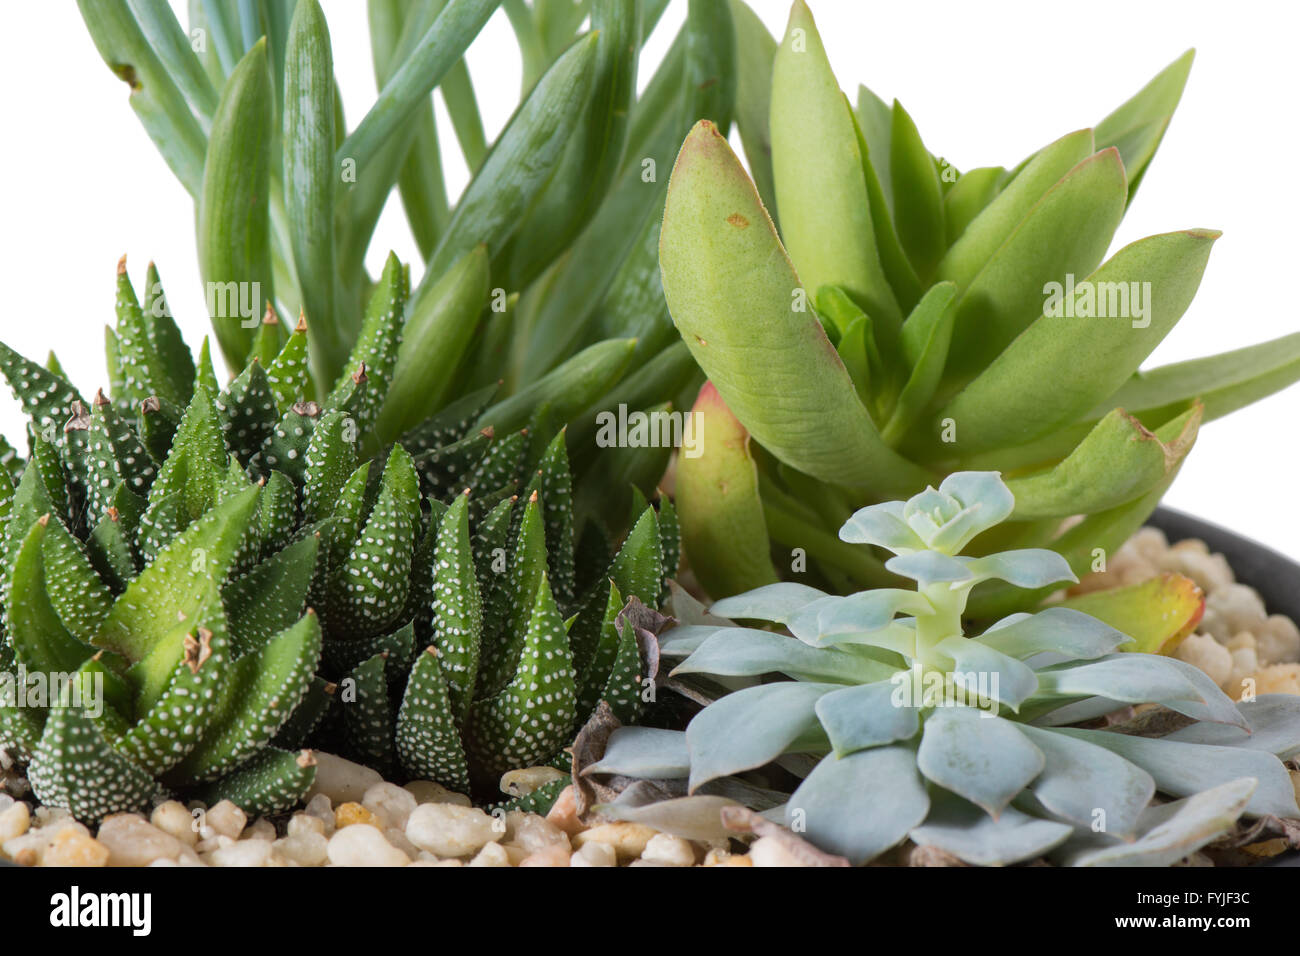 closeup view of an indoor plant garden with succulent plants, in a pot with stones isolated on white. Stock Photo